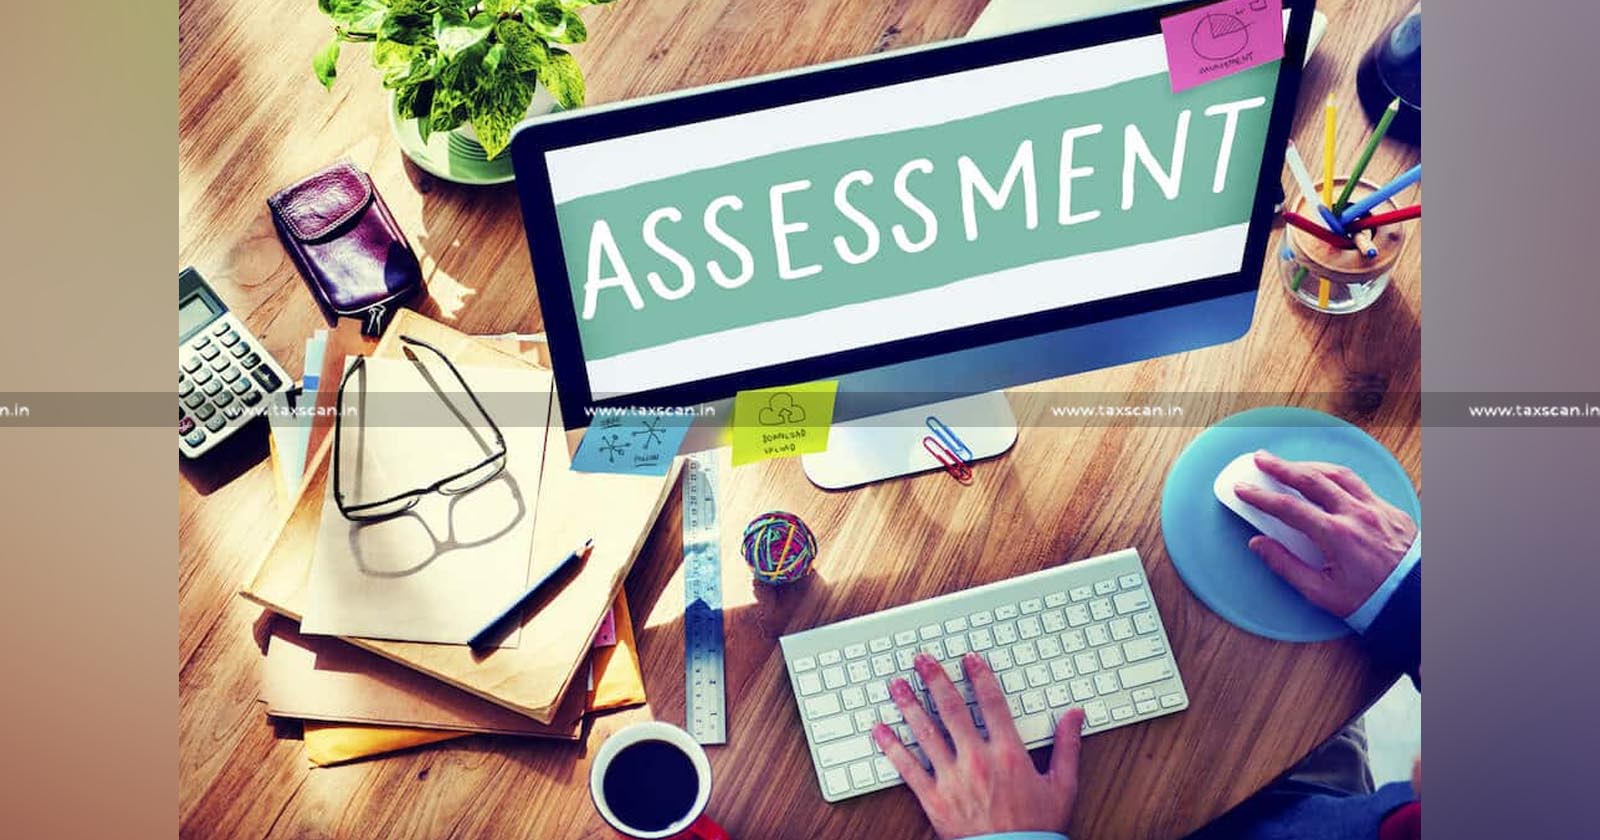 Search Statement Recorded from Third Parties - Search Statement - Statement Recorded - Third Parties - Framing Current Assessment - Current Assessment - Assessment - ITAT - Taxscan